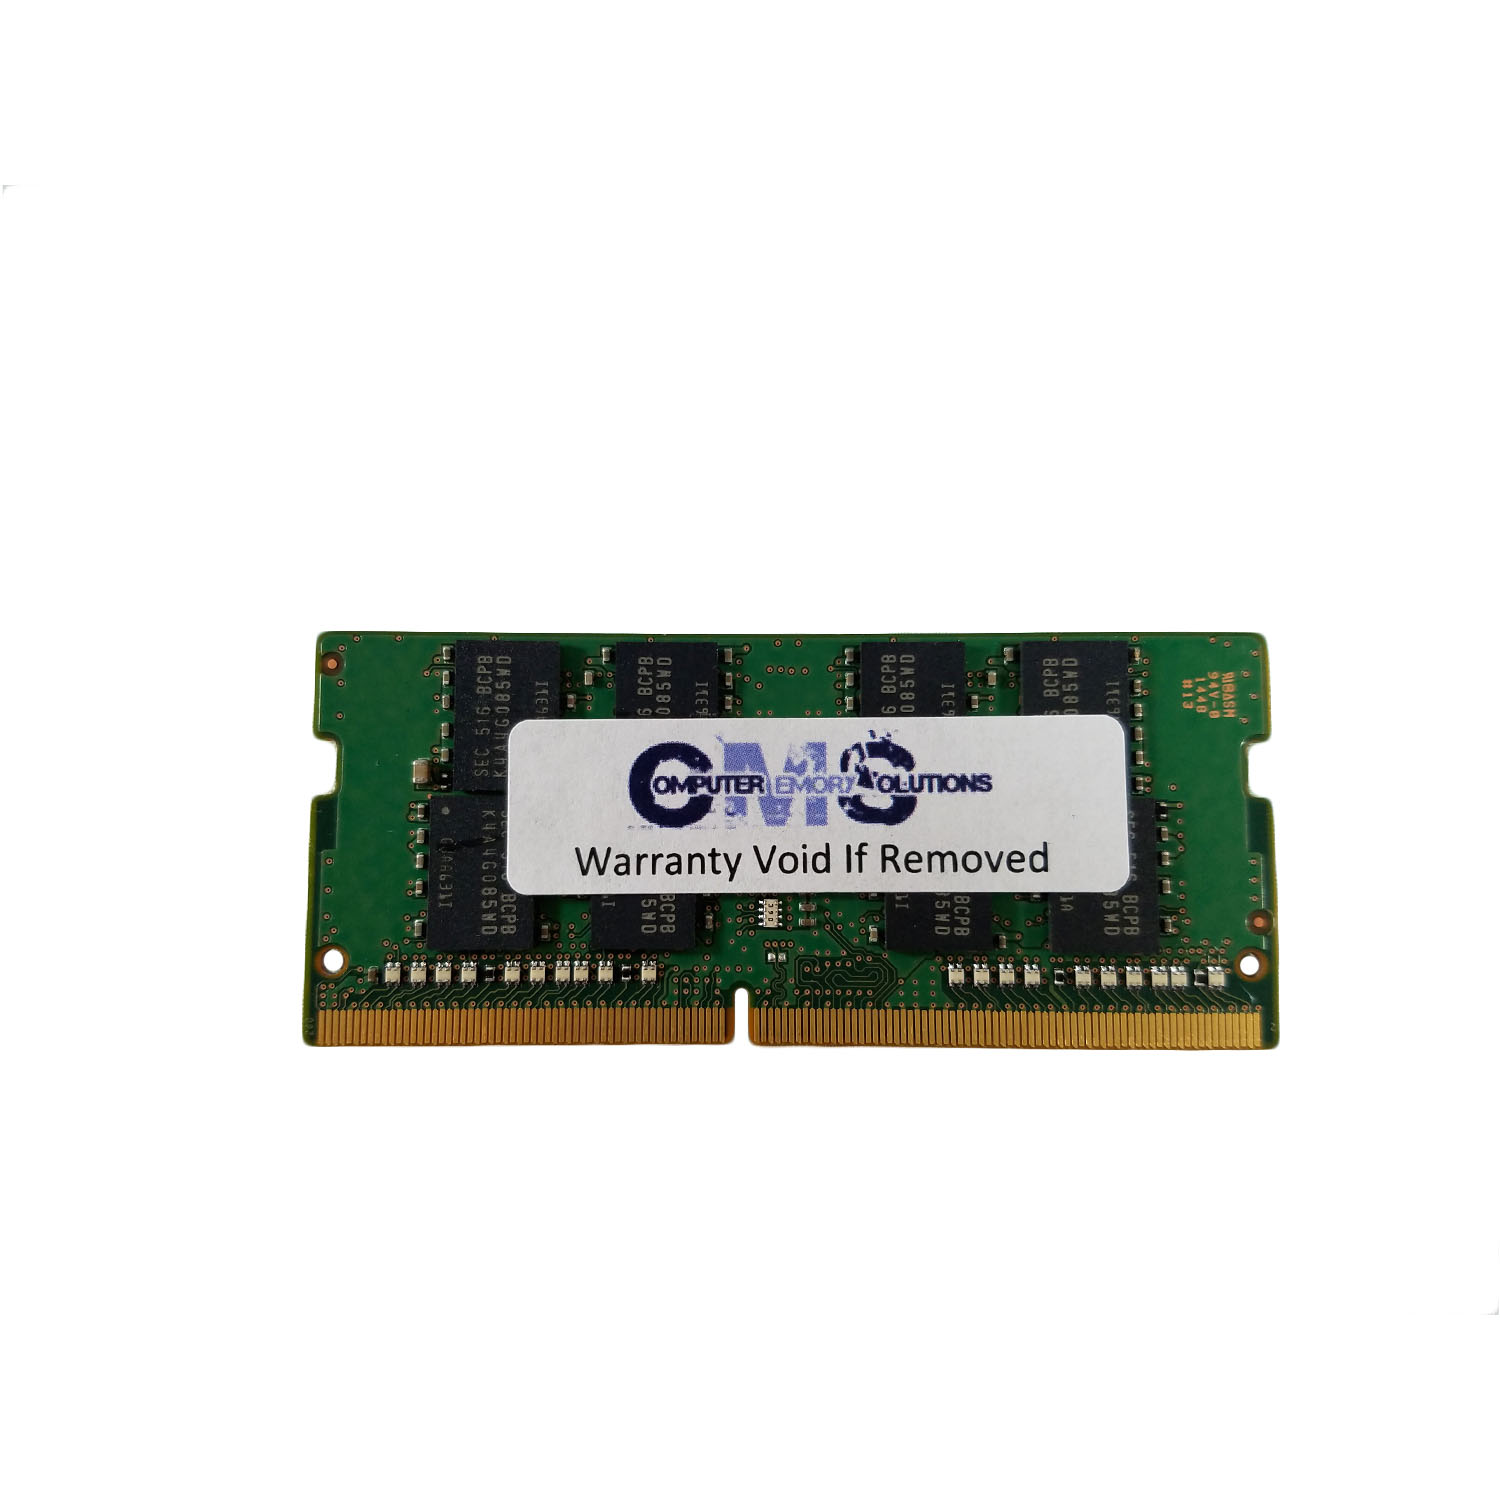 CMS 16GB (1X16GB) DDR4 21300 2666MHZ NON ECC SODIMM Memory Ram Compatible with Dell G3 15 (3579) Gaming, G3 17 (3779) Gaming - D35 - image 1 of 3